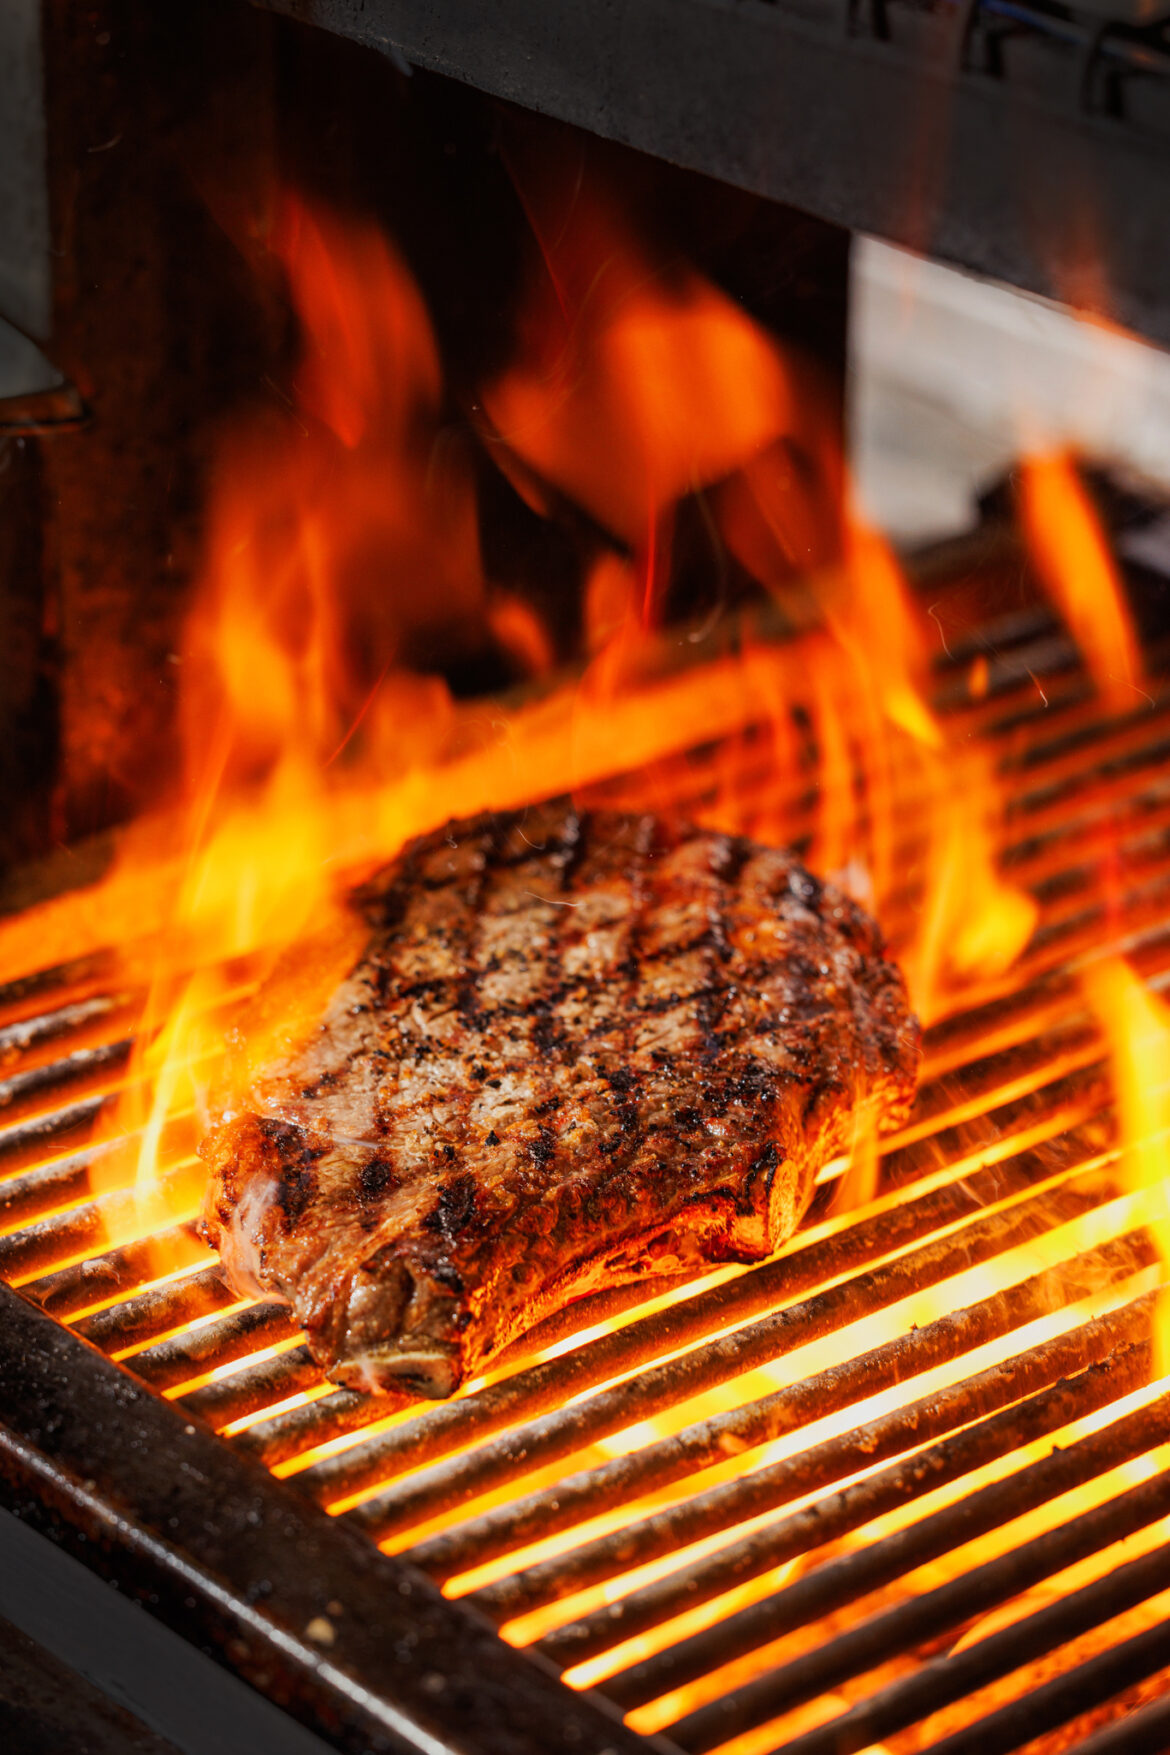 A photo of a steak on a char grill surrounded by flames